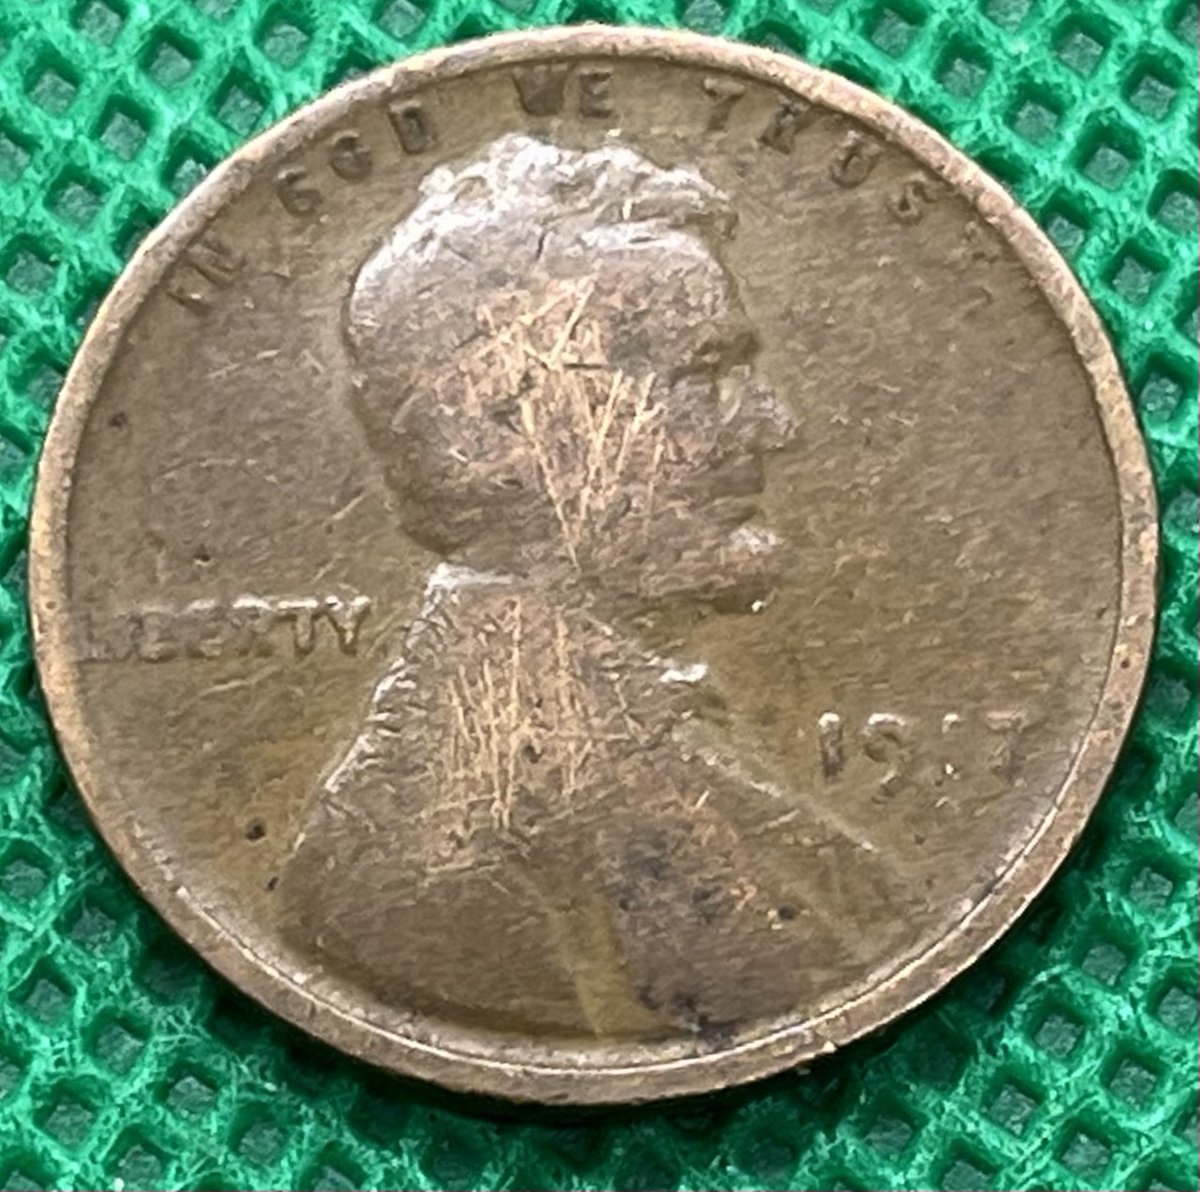 I found wheat pennies from five decades in the same box. Lastly, a very worn and scratched 1917. They made almost 200 million of these; still pretty amazing to find in circulation after 107 years. That's it; there weren't any 1909s.